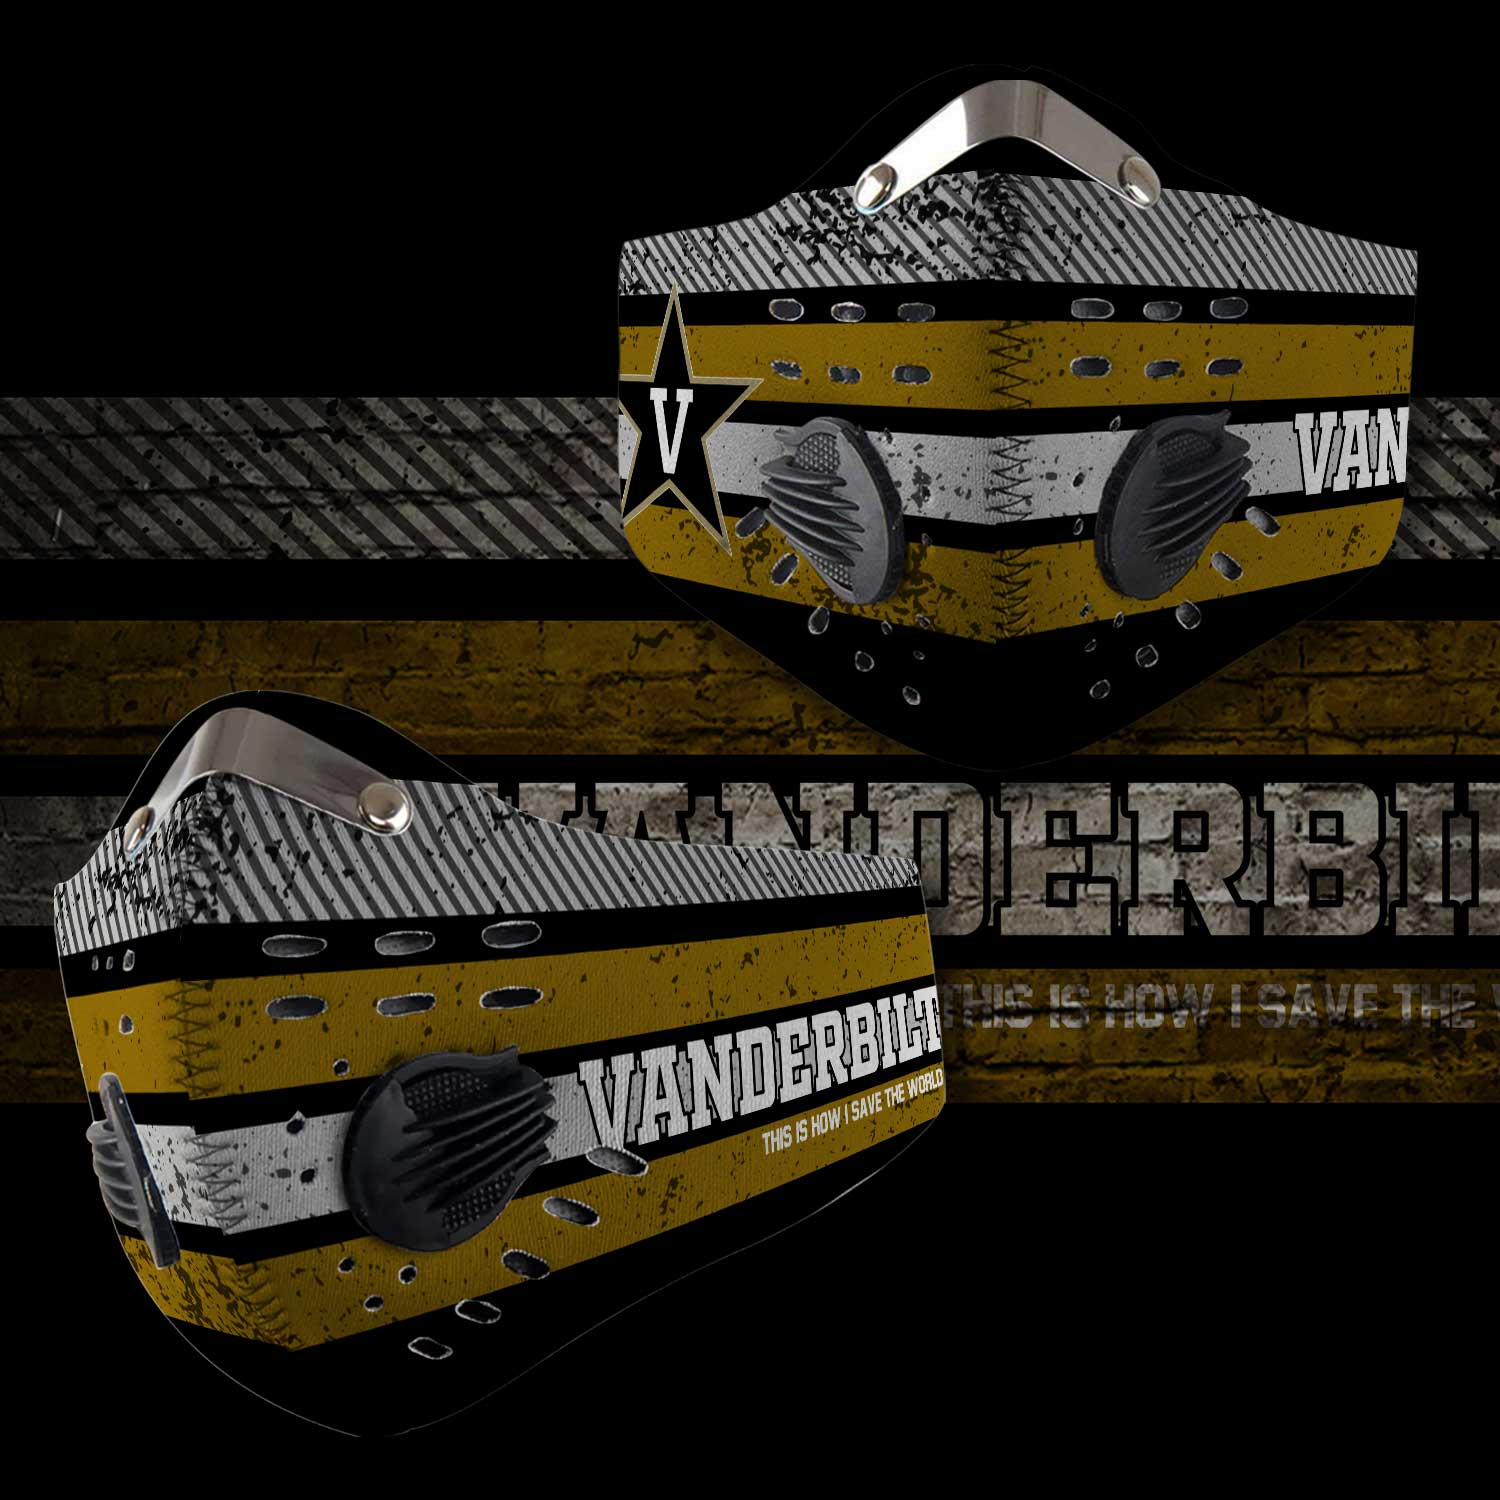 Vanderbilt commodores this is how i save the world carbon filter face mask 2